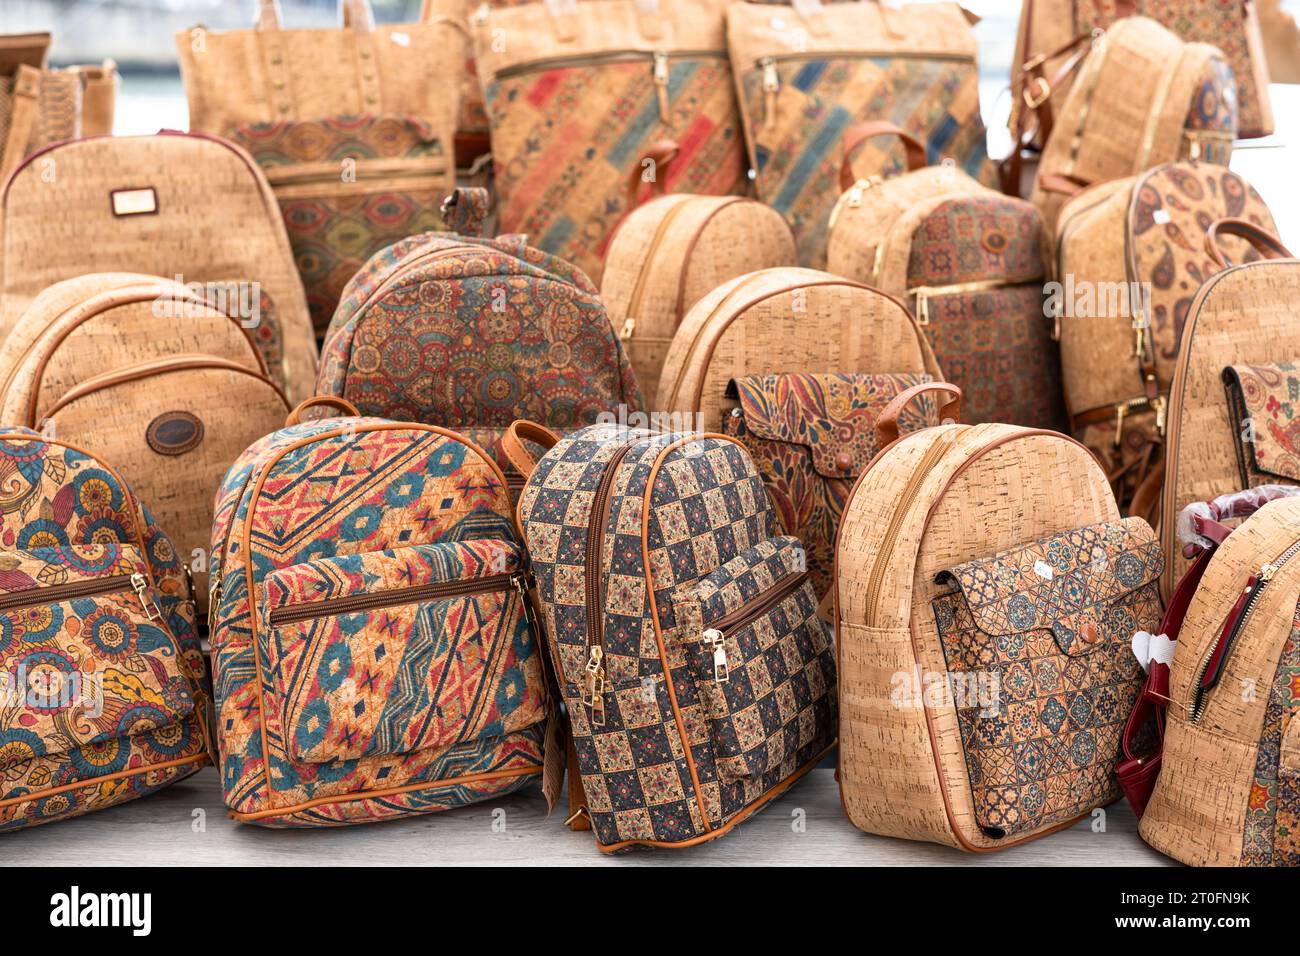 60+ Bag Full Of Corks Stock Photos, Pictures & Royalty-Free Images - iStock